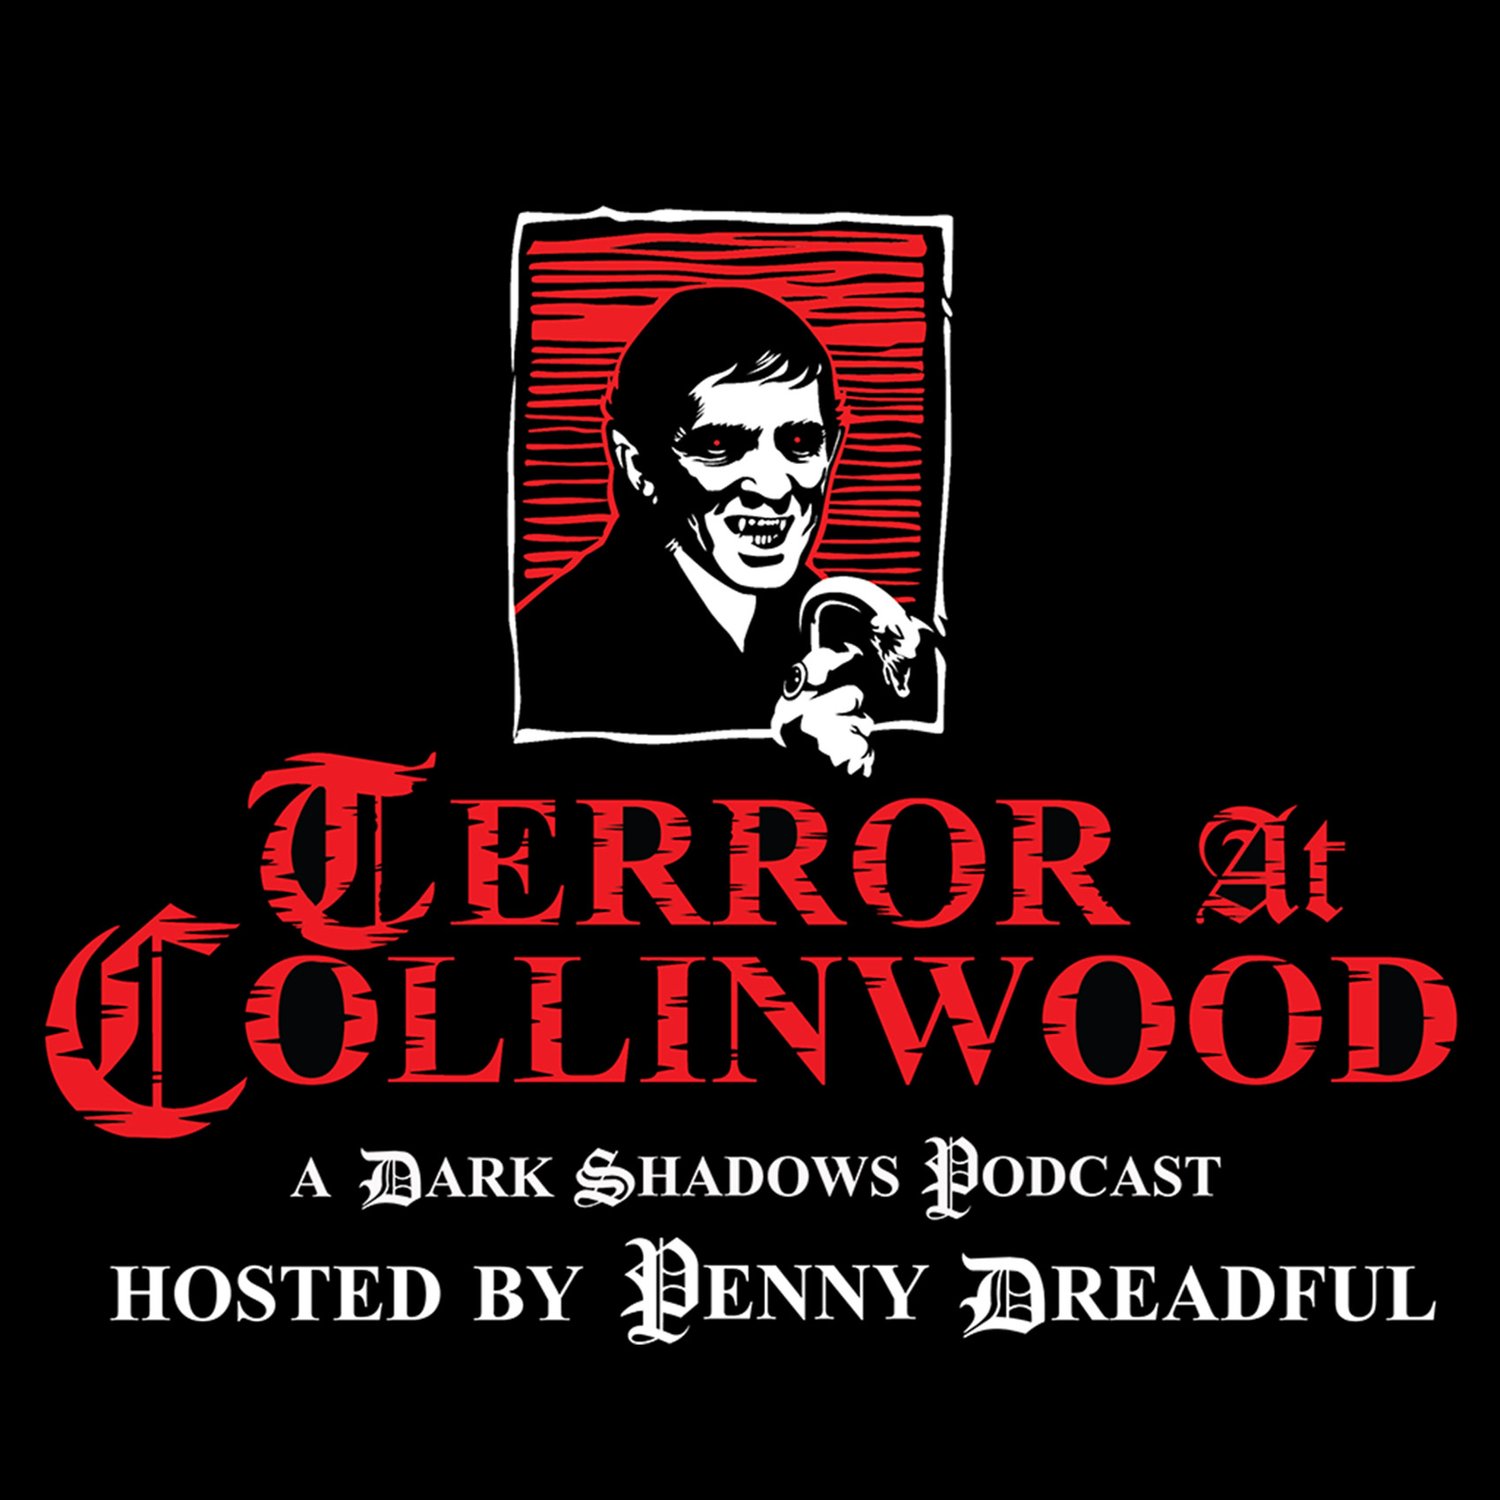 Terror at Collinwood Episode 71: The Dark Shadows Podcast of Questions & Answers Volume 1